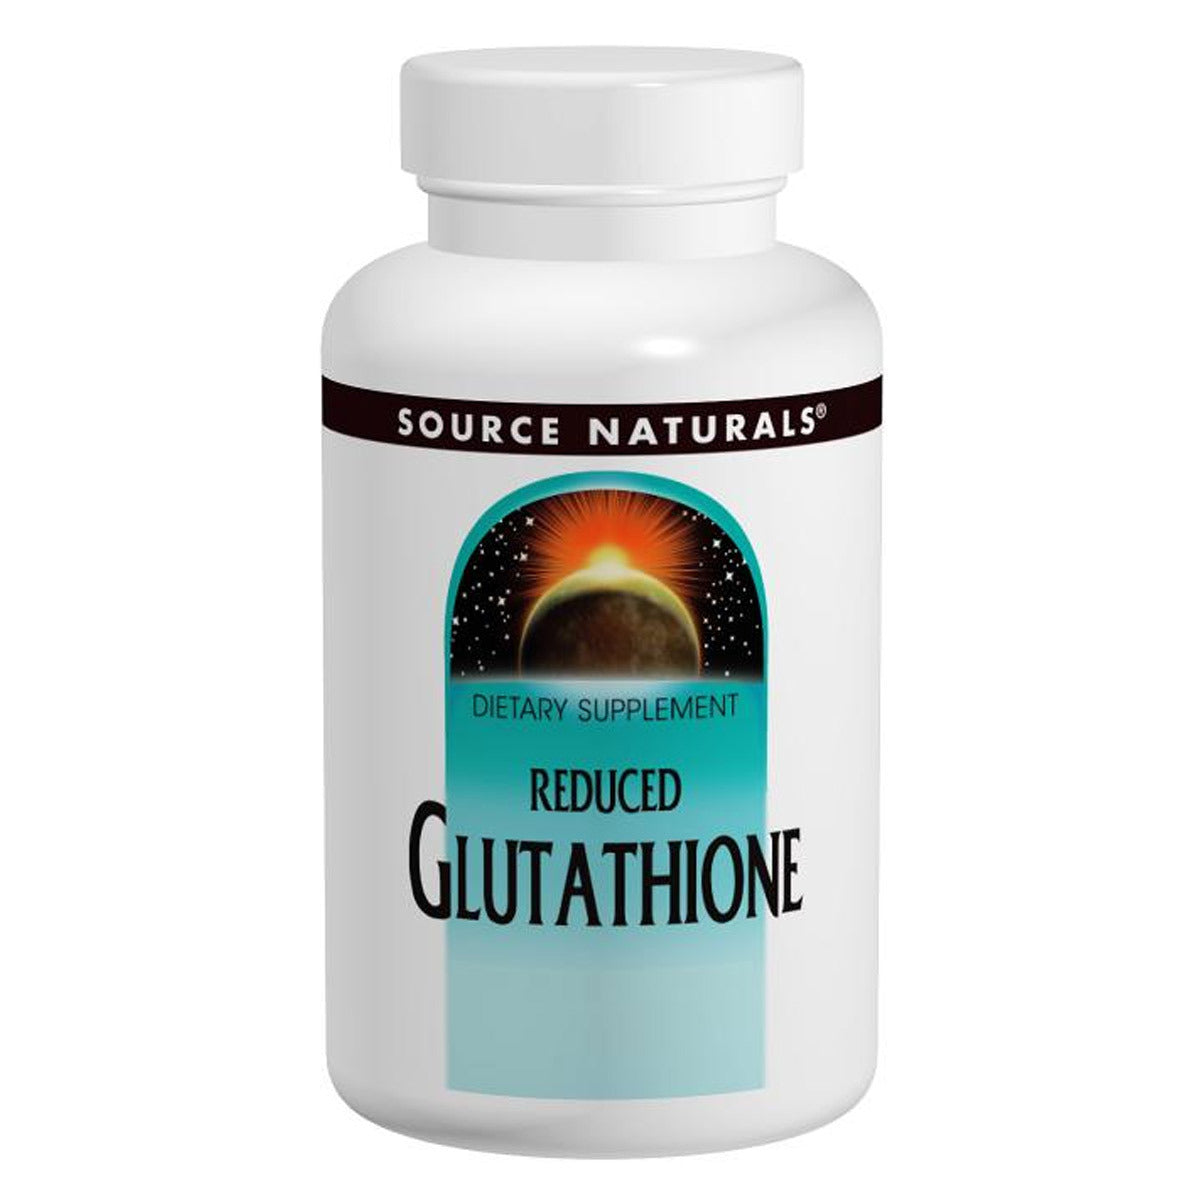 Primary image of Reduced Glutathione